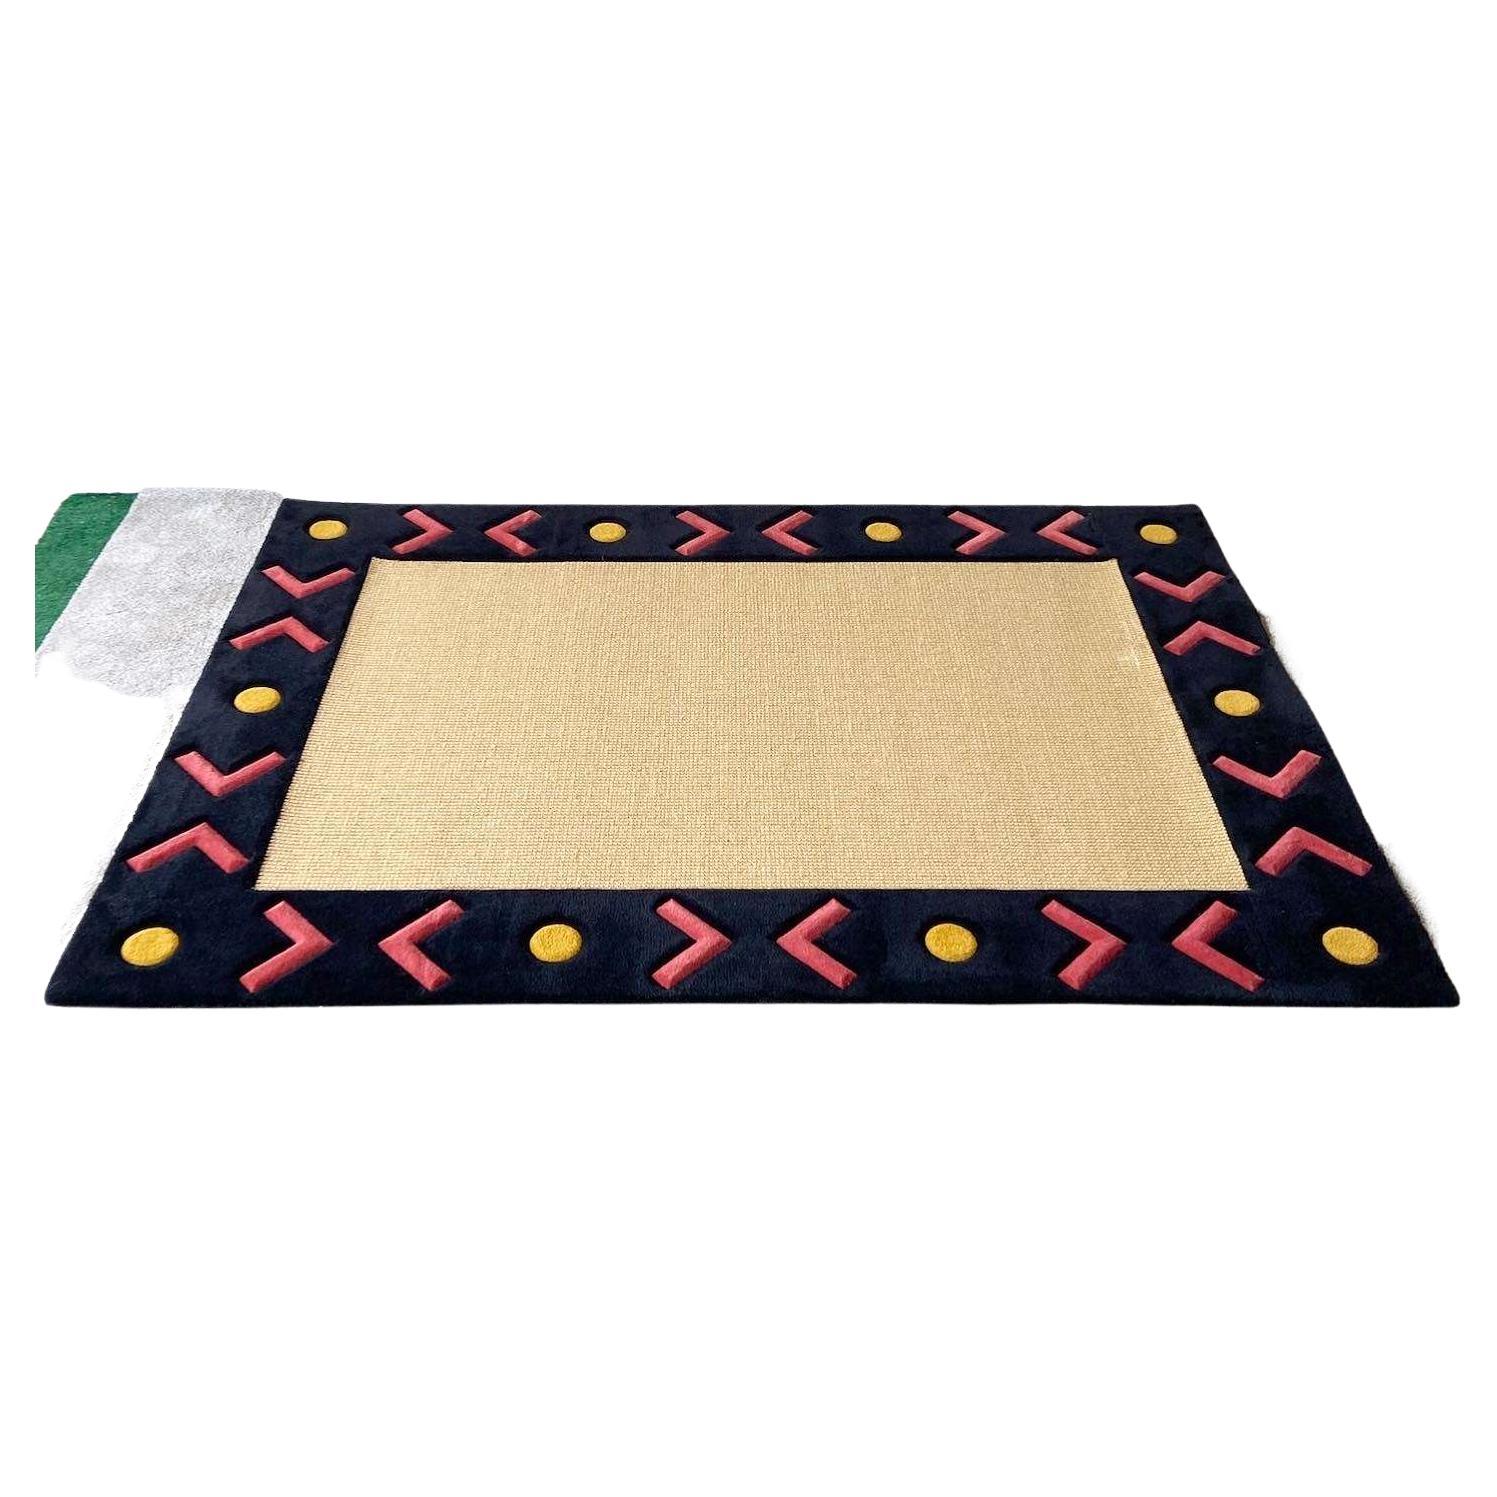 Boho Southwestern Natural Fiber, Black Red and Yellow Rectangular Area Rug For Sale